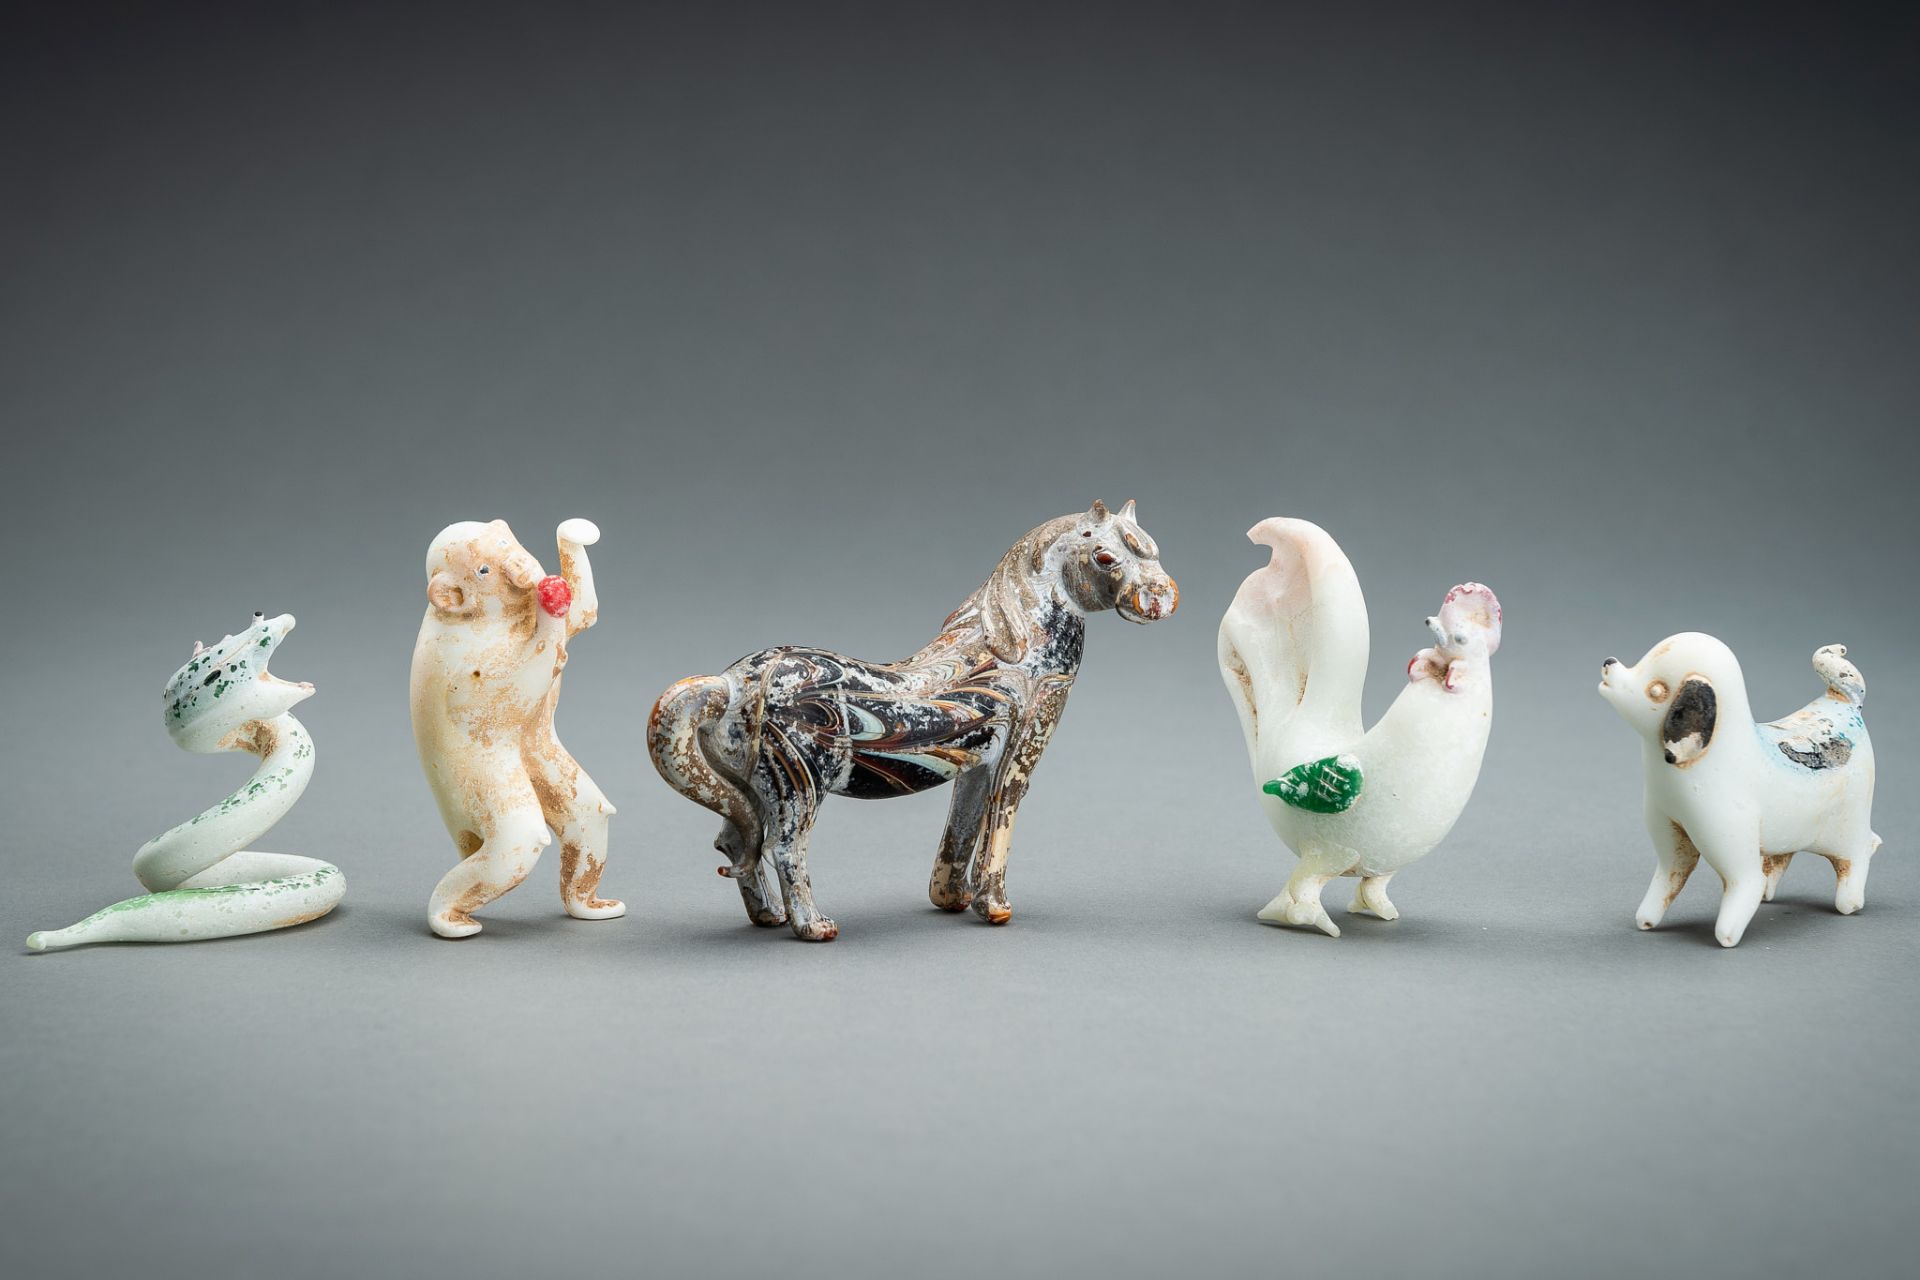 A RARE GROUP OF FIVE 'ZODIAC' GLASS FIGURES, QING DYNASTY OR EARLIER